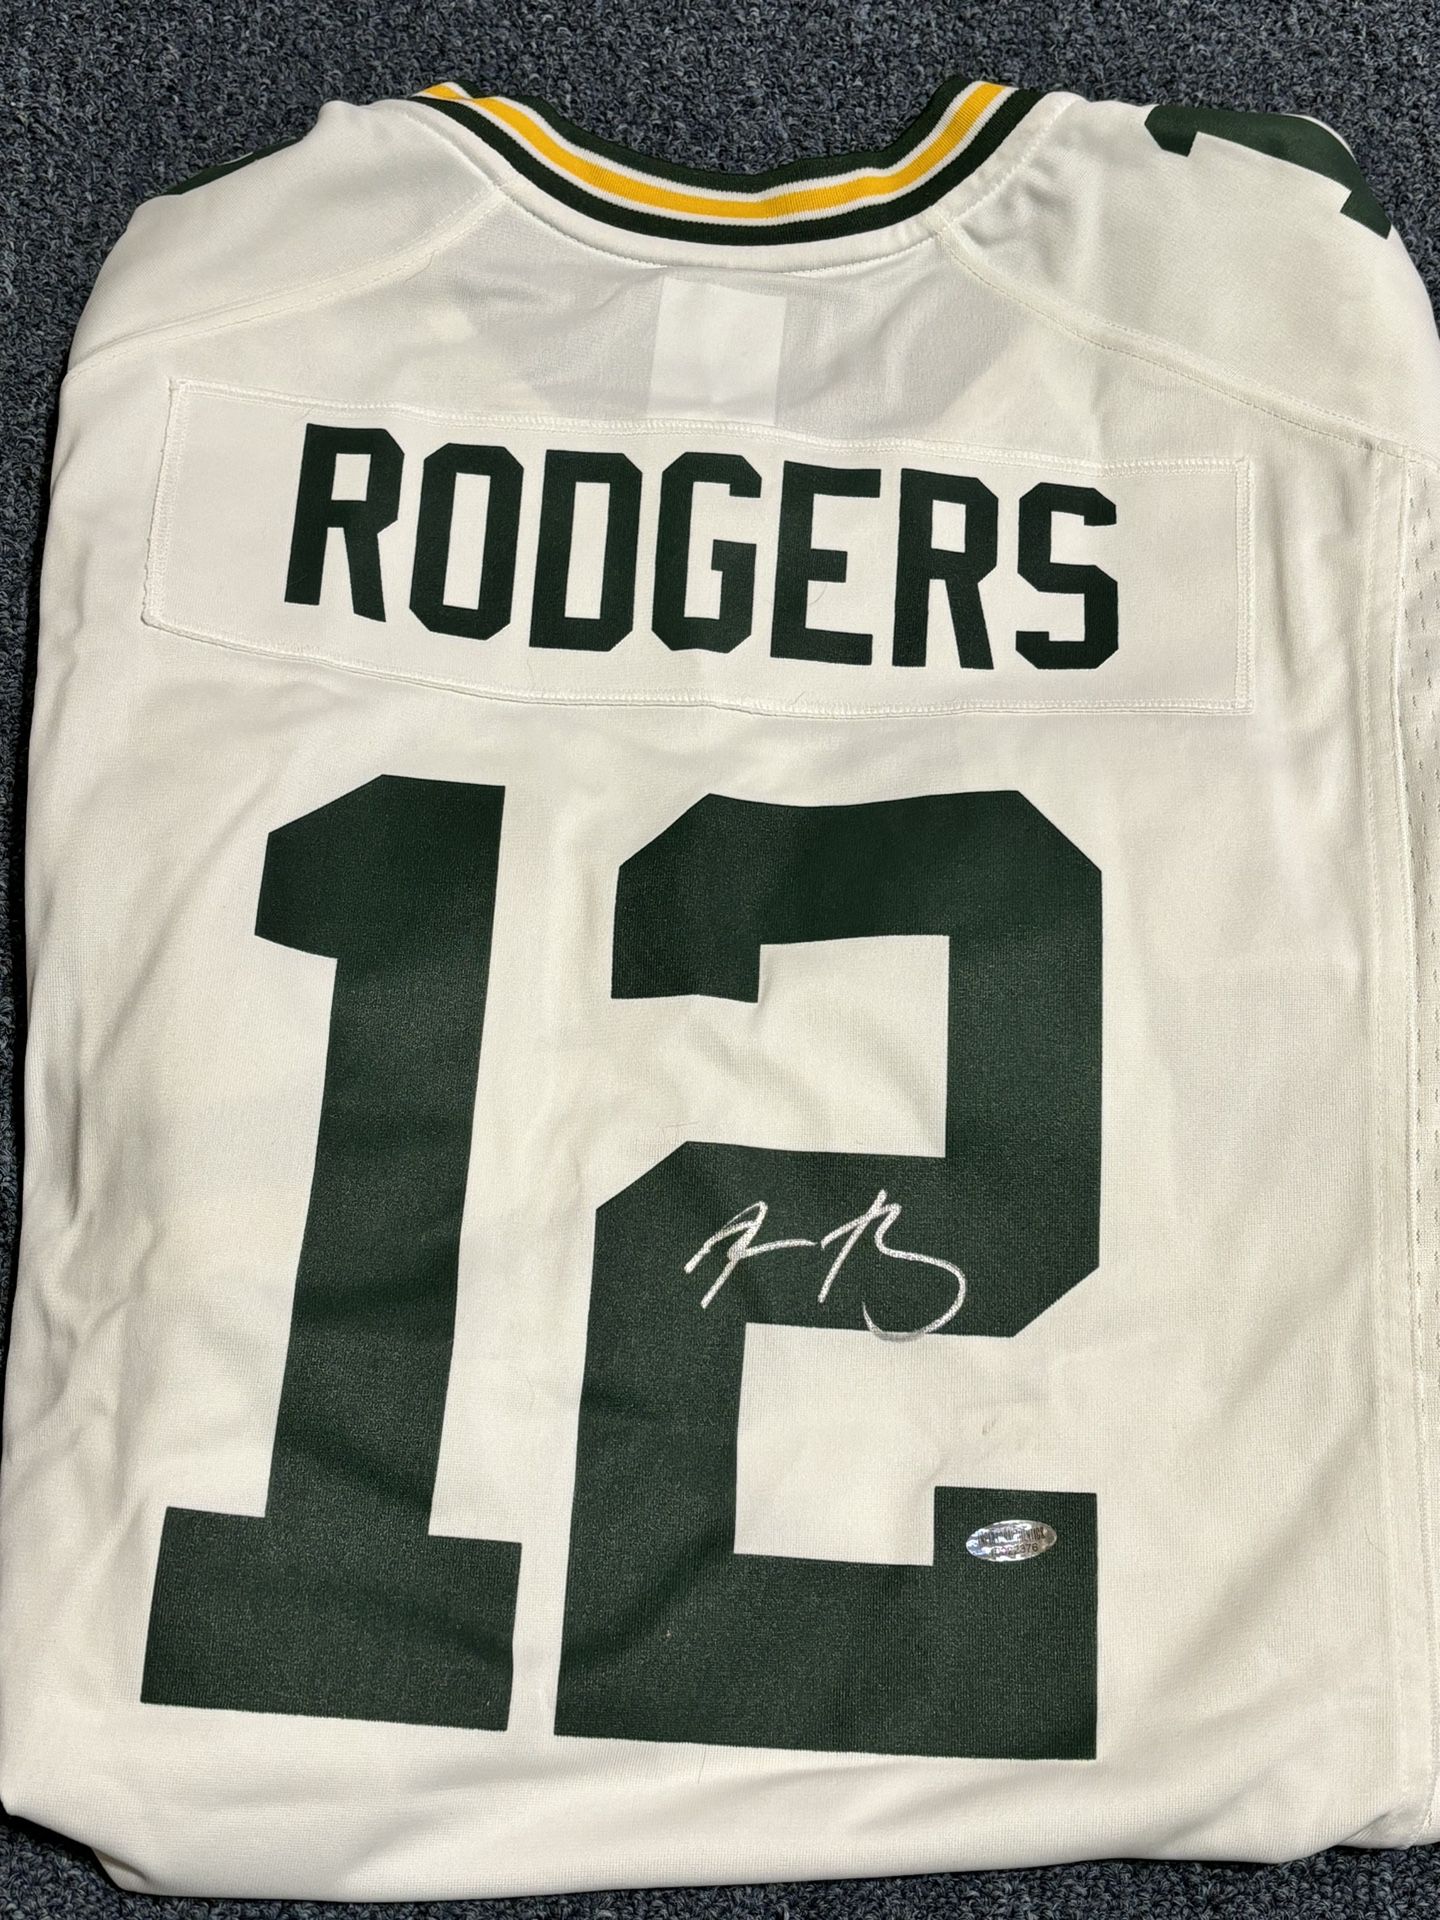 Autographed Aaron Rodger’s Jersey